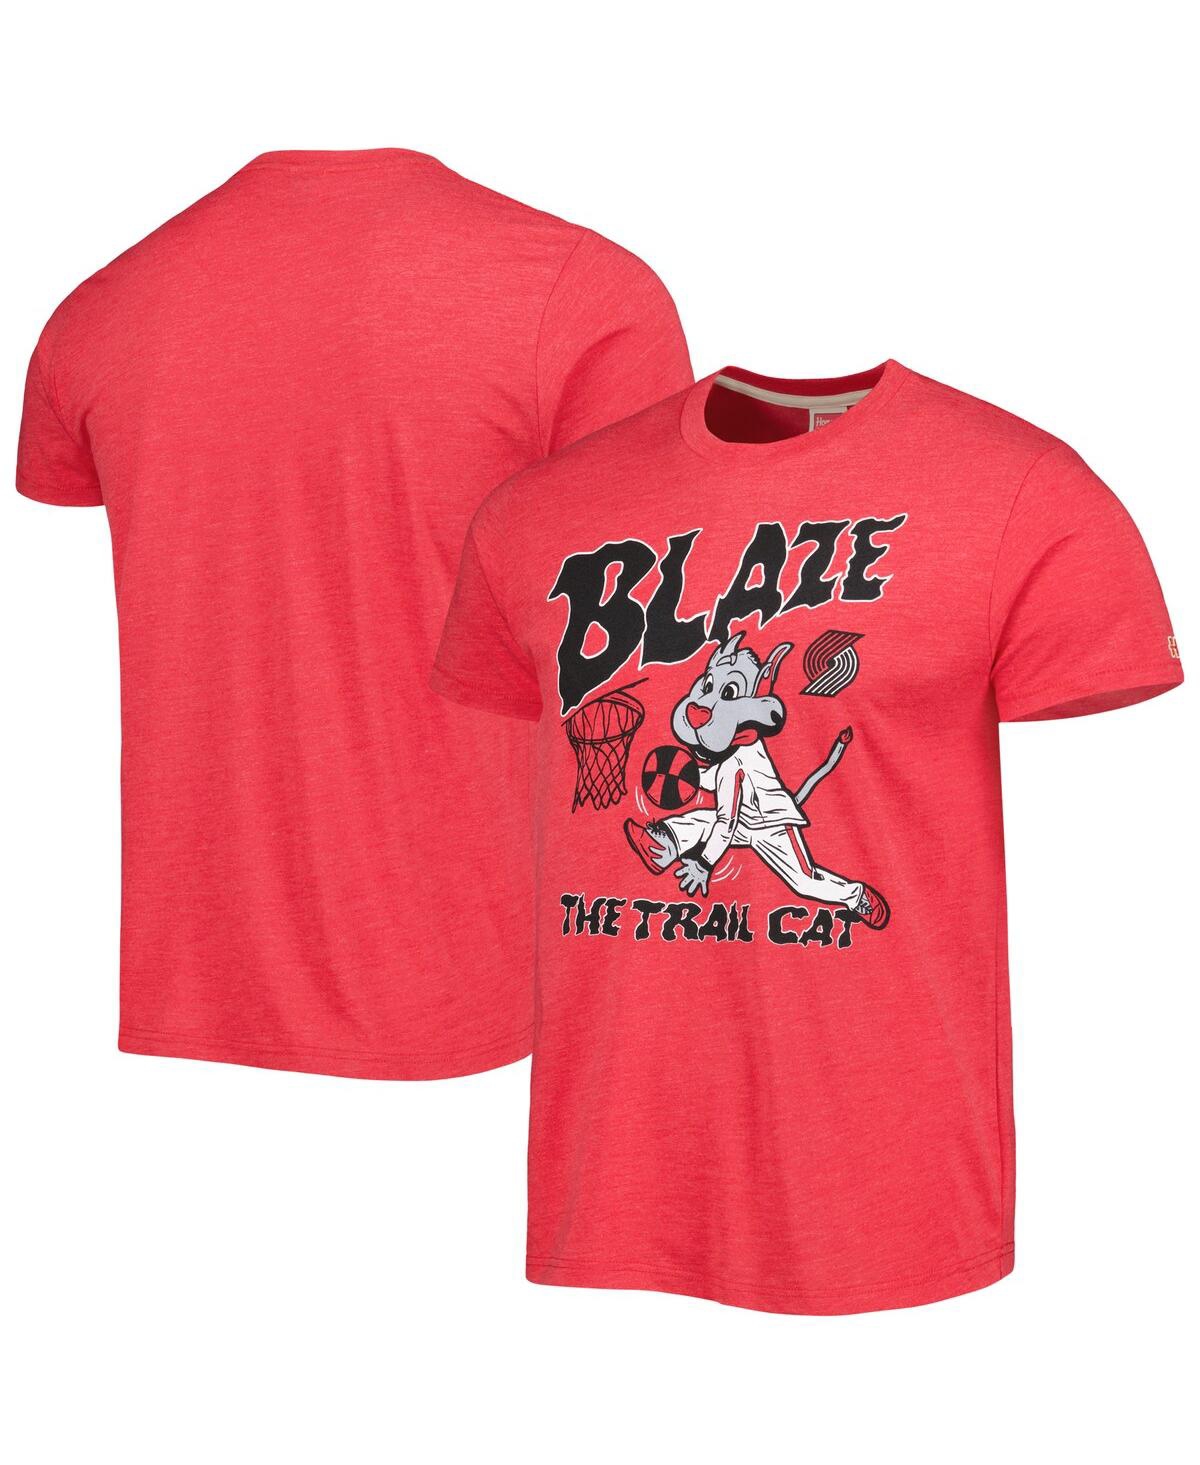 Men's and Women's Homage Red Portland Trail Blazers Team Mascot Tri-Blend T-shirt - Red